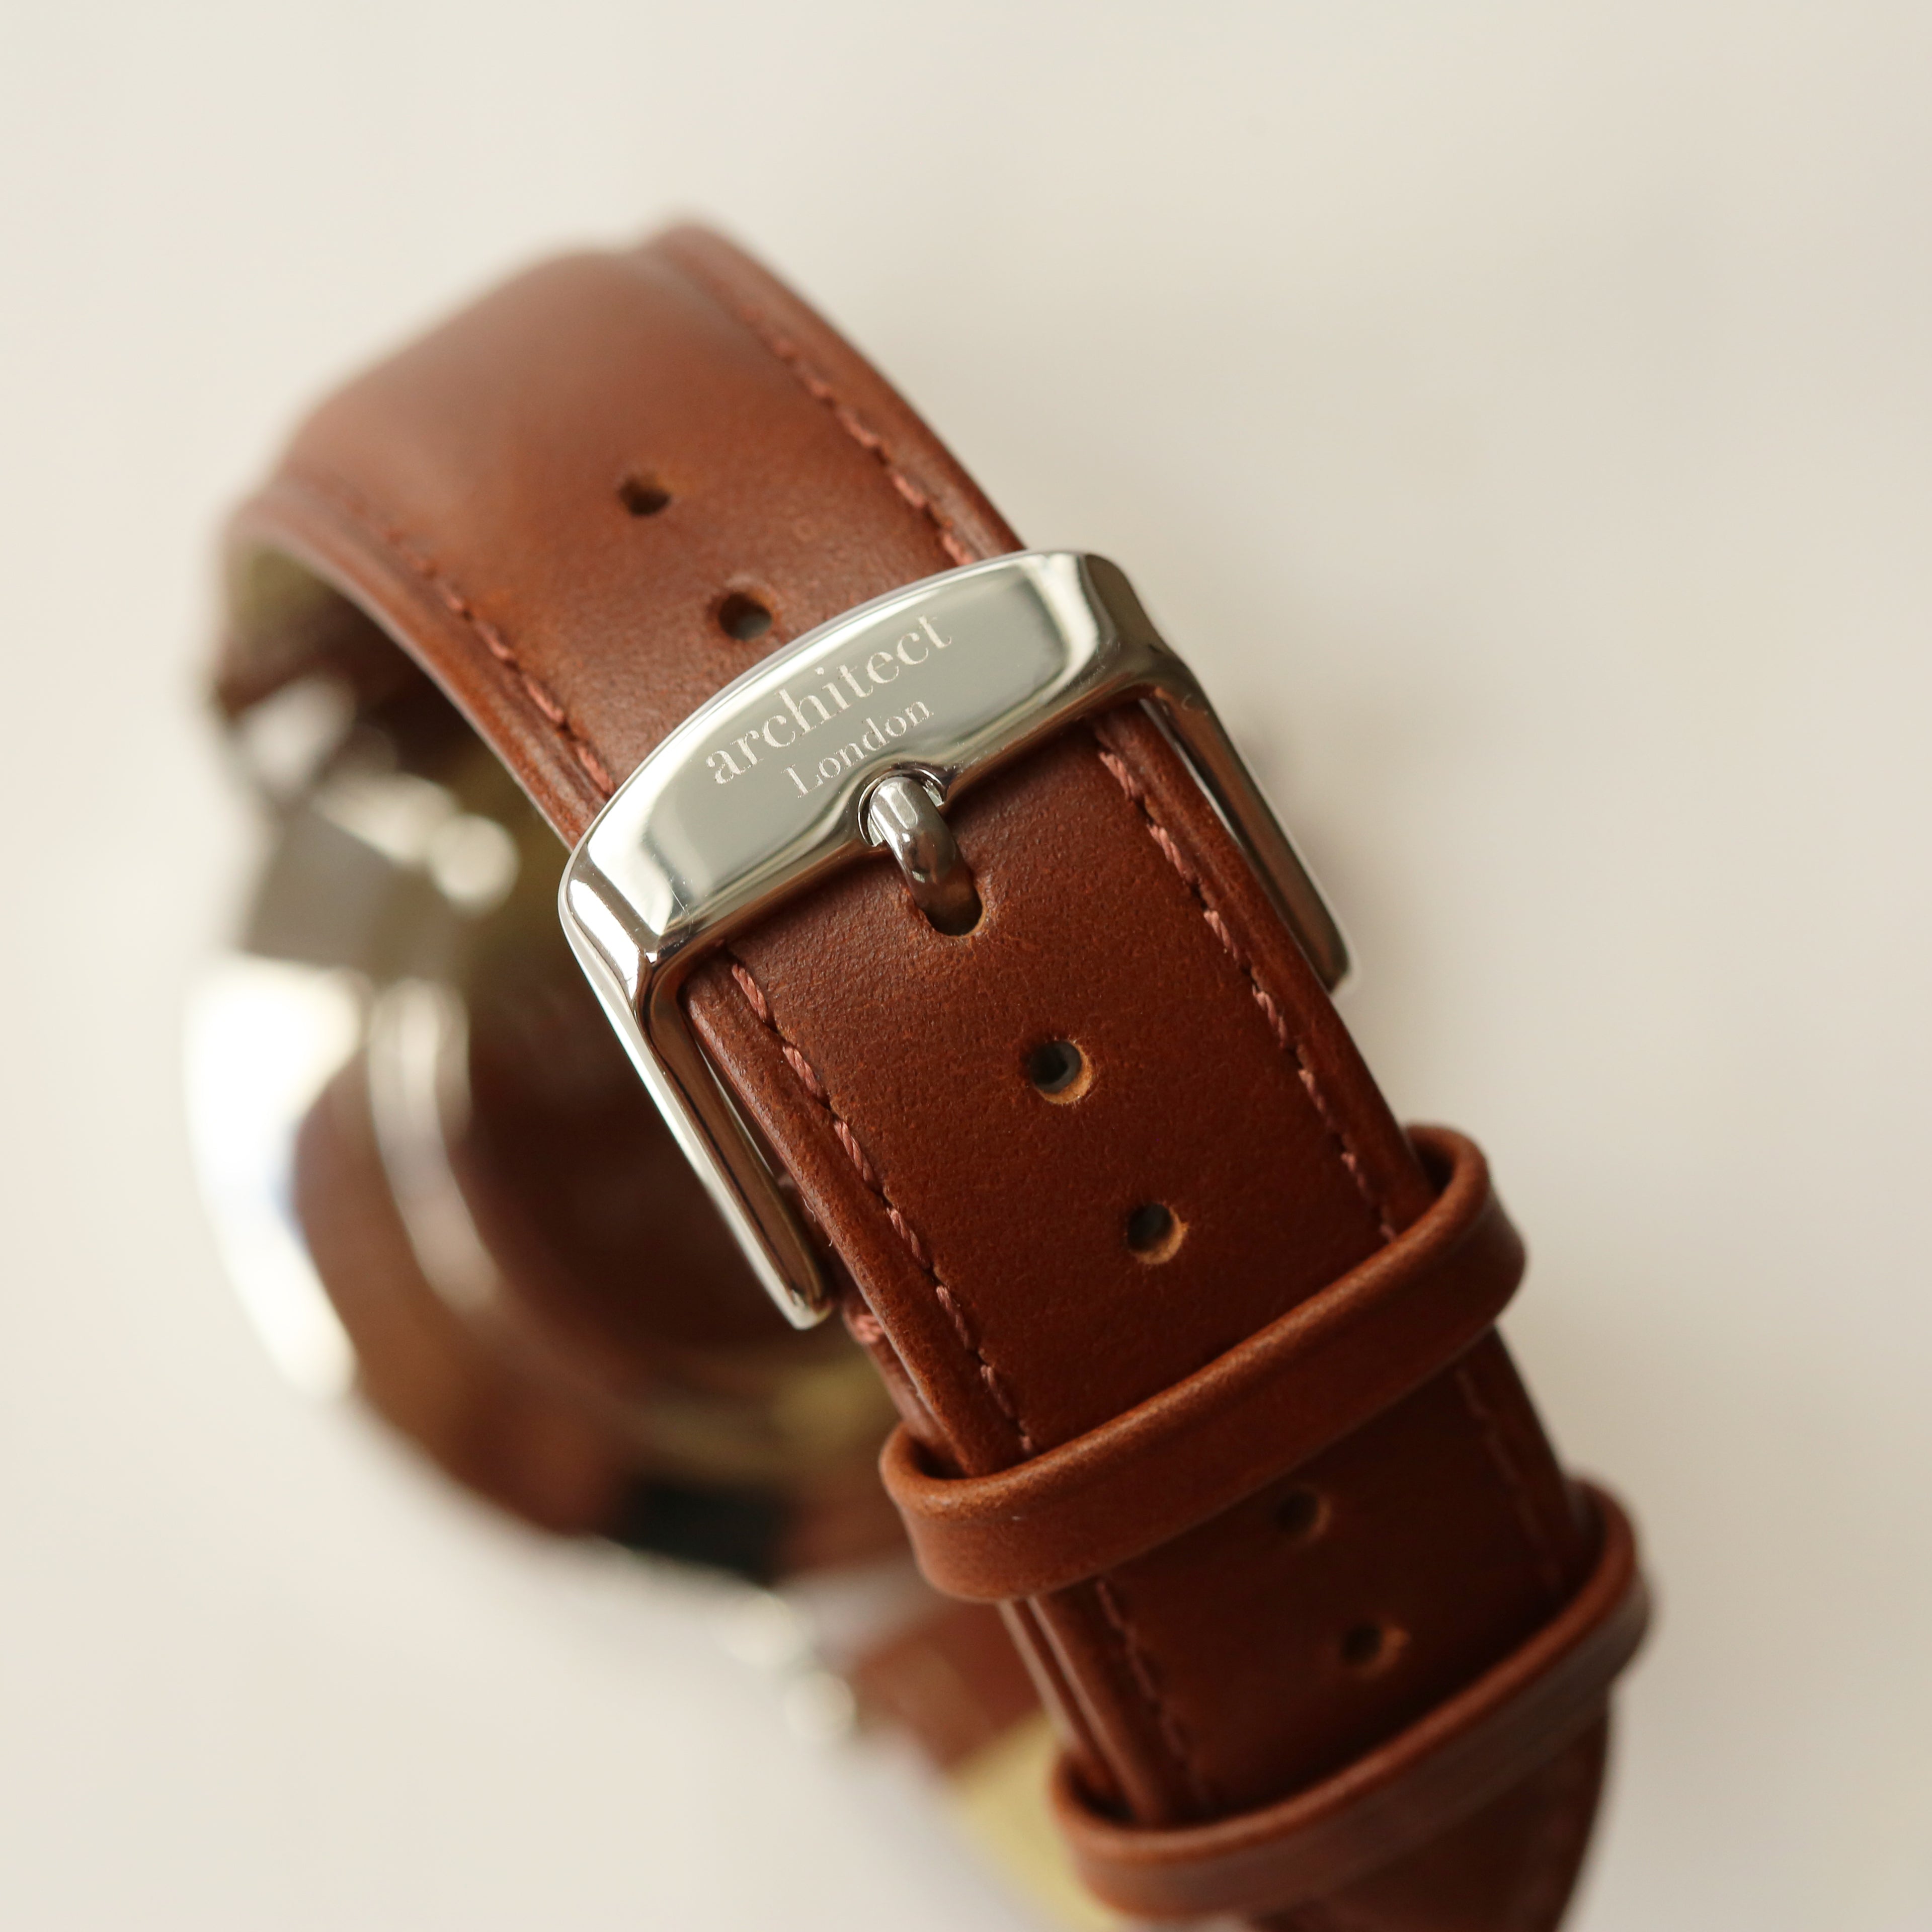 Contactless Payment Watch - Men's Architect Zephyr + Walnut Strap + Own Handwriting Engraving